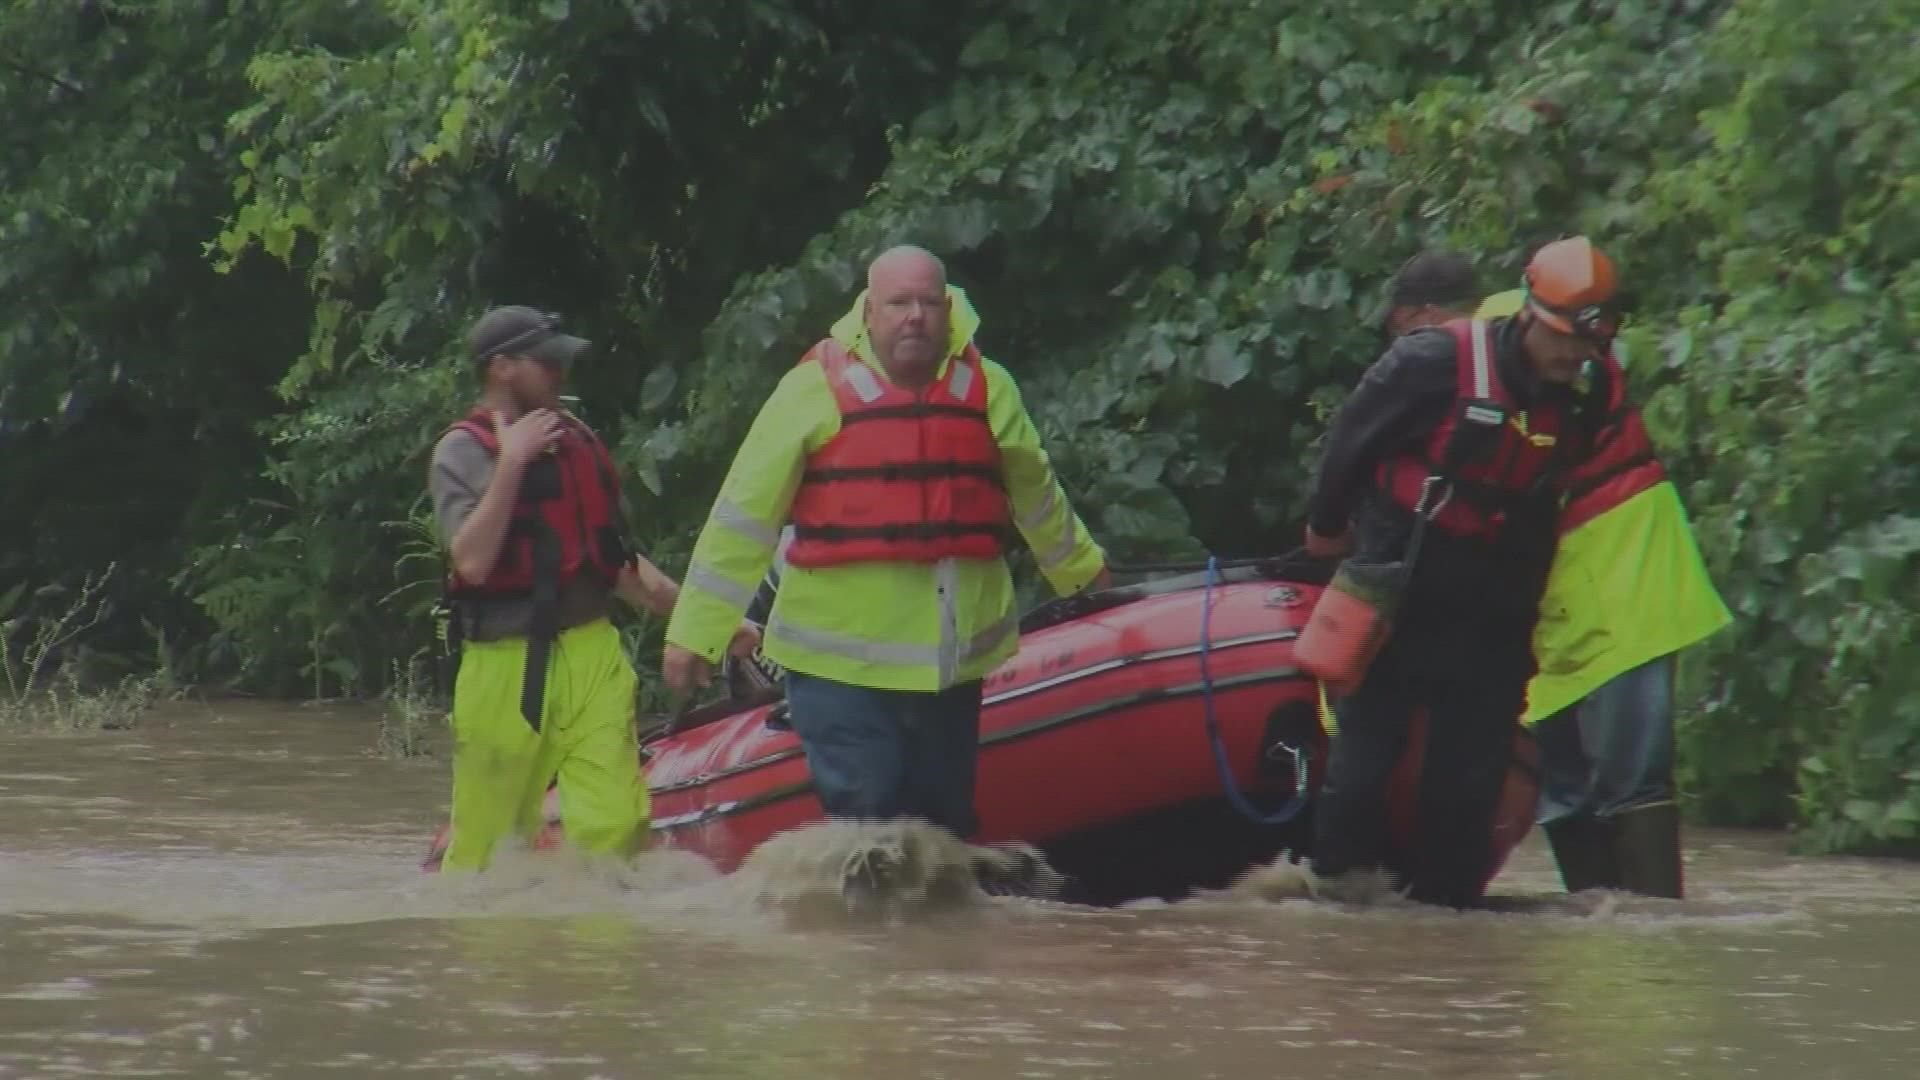 With all the flooding and rain over the summer, local leaders in Tennessee gathered to come up with a plan.